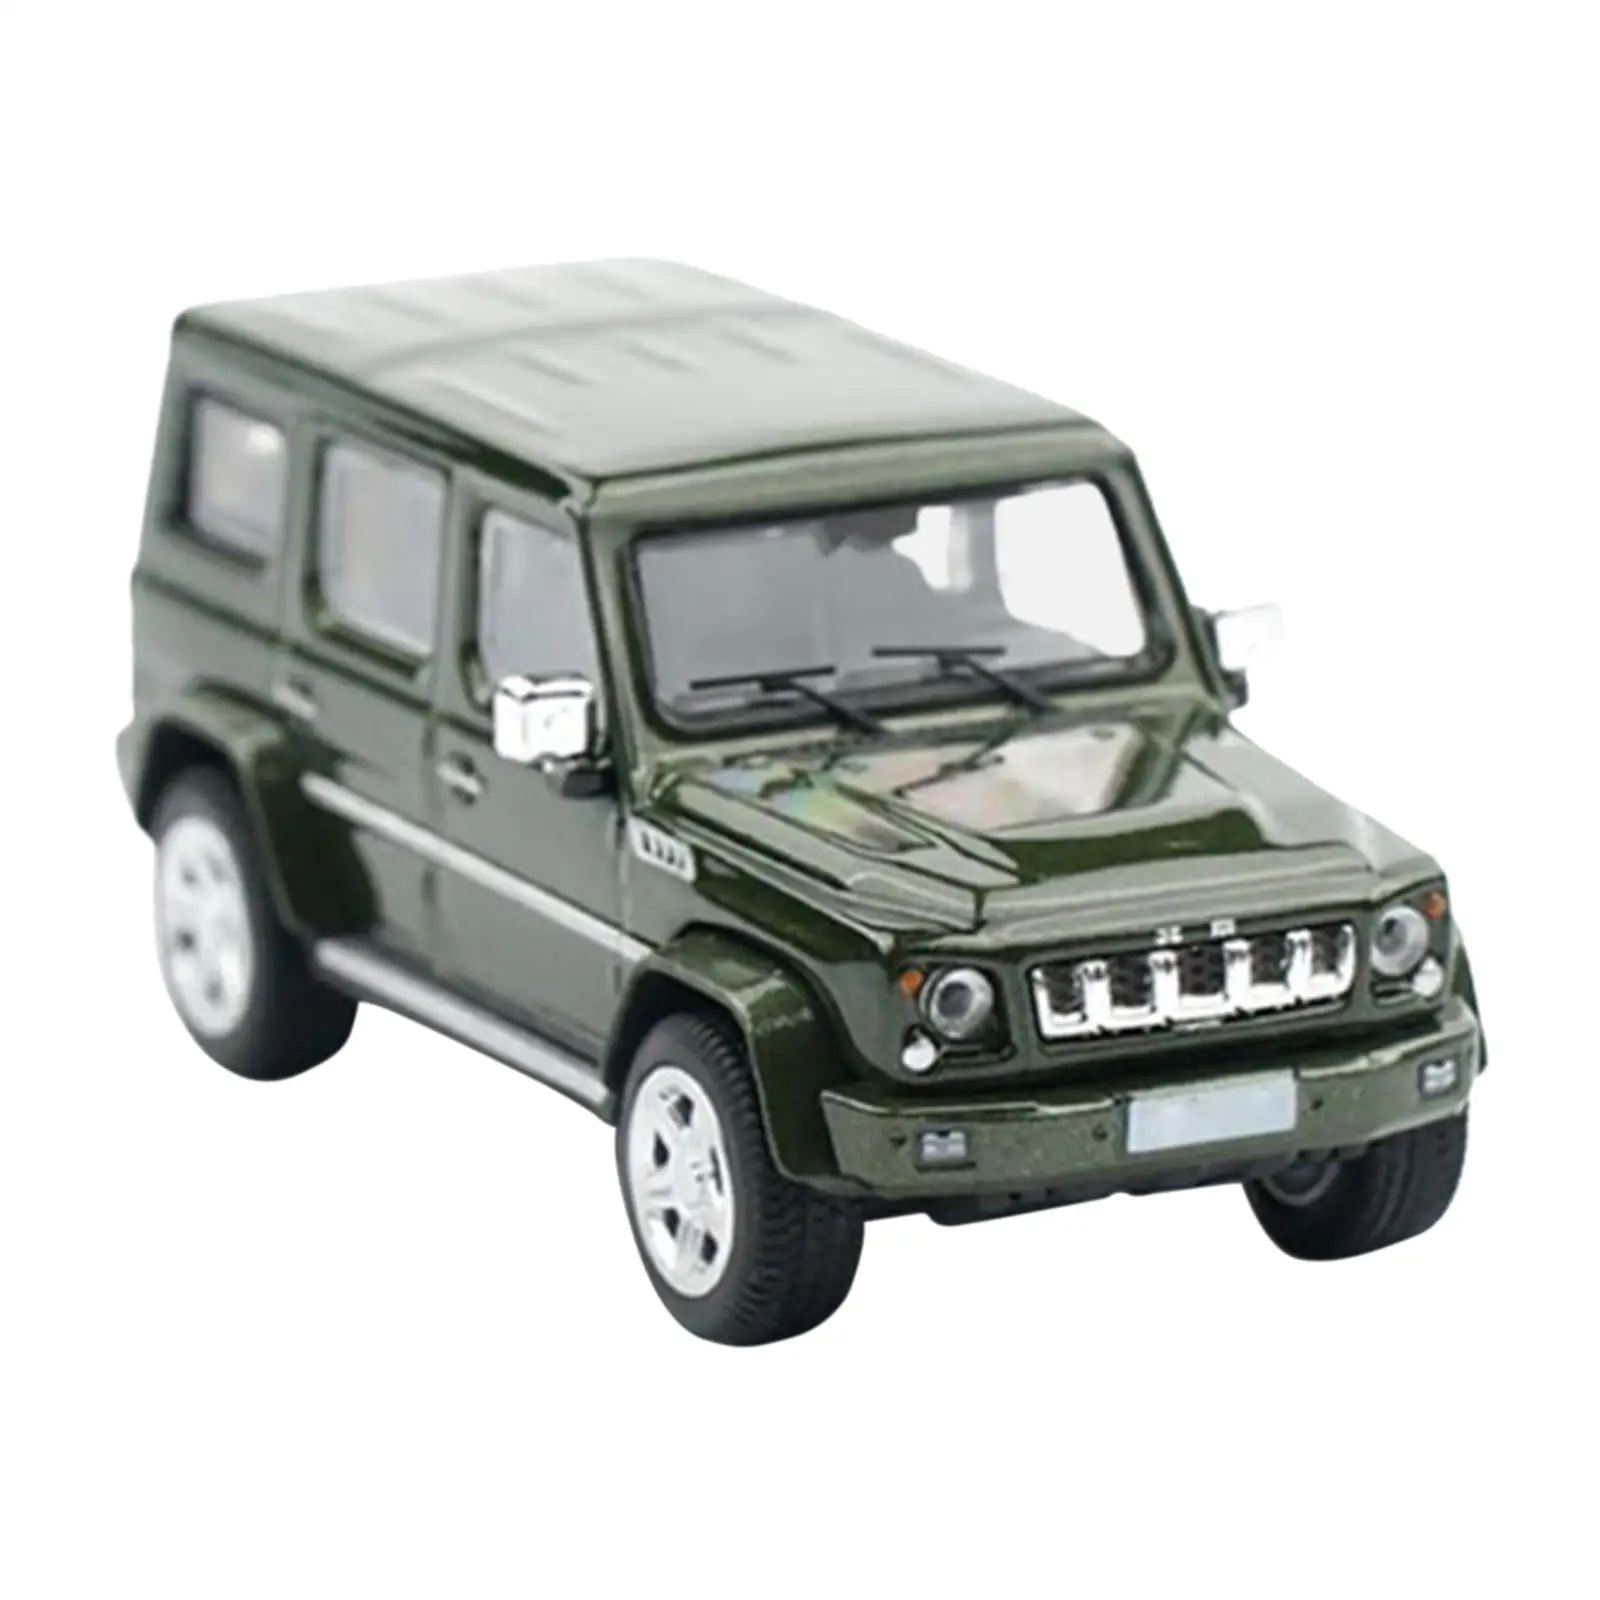 1/64 Diecast Model Car Diorama Scenes Diecast Toys Collection for Scenery Landscape